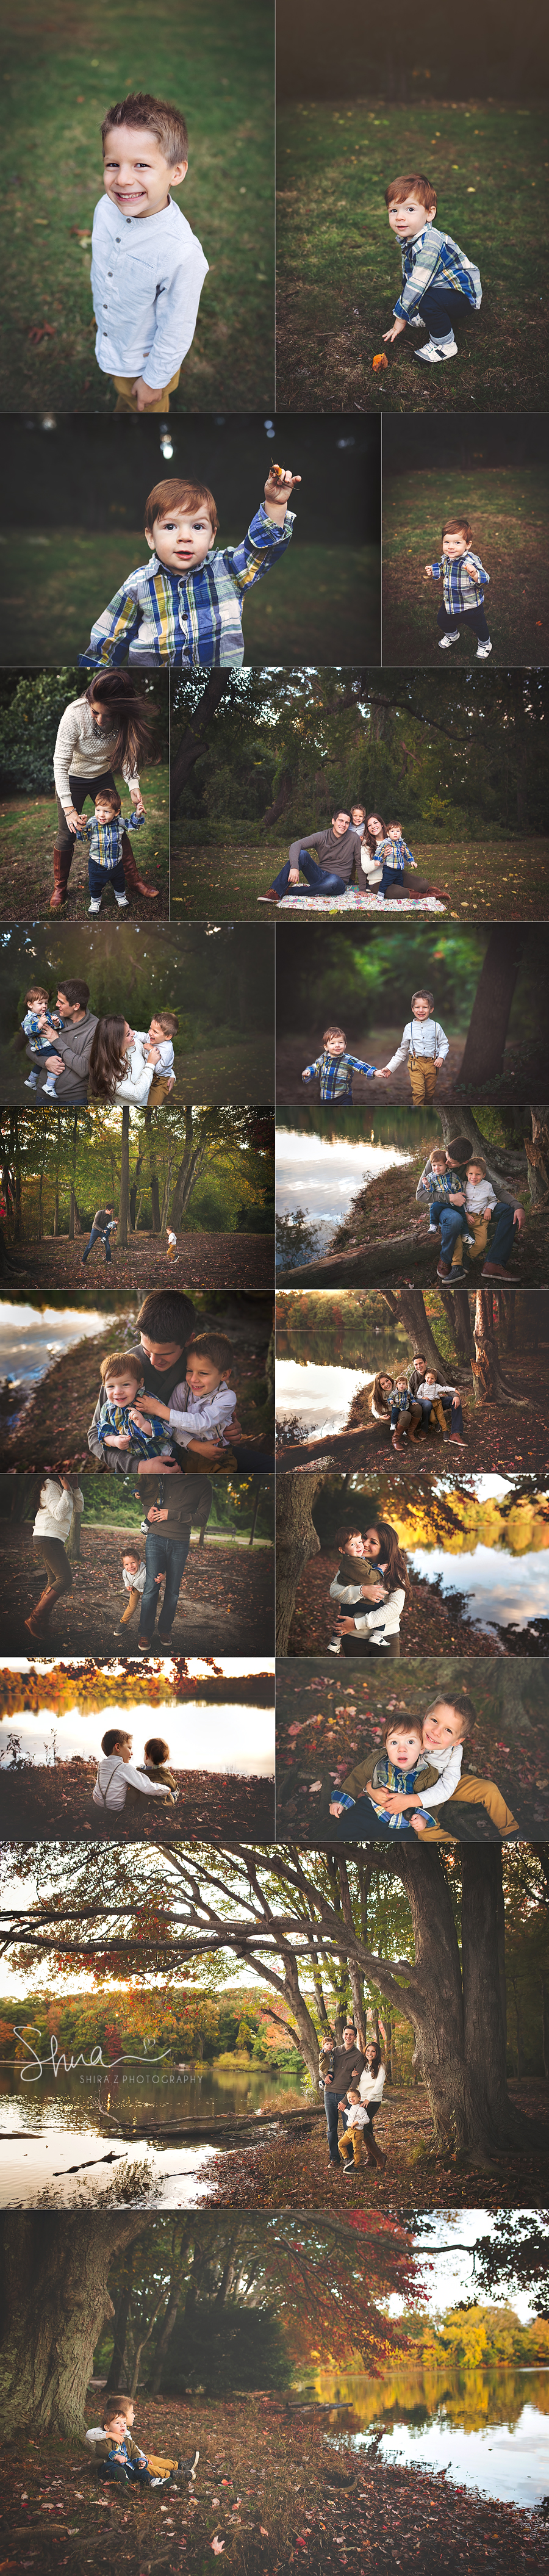 collage of images at Hempstead Lake Park of long island family with two little boys. A family photographers dream!